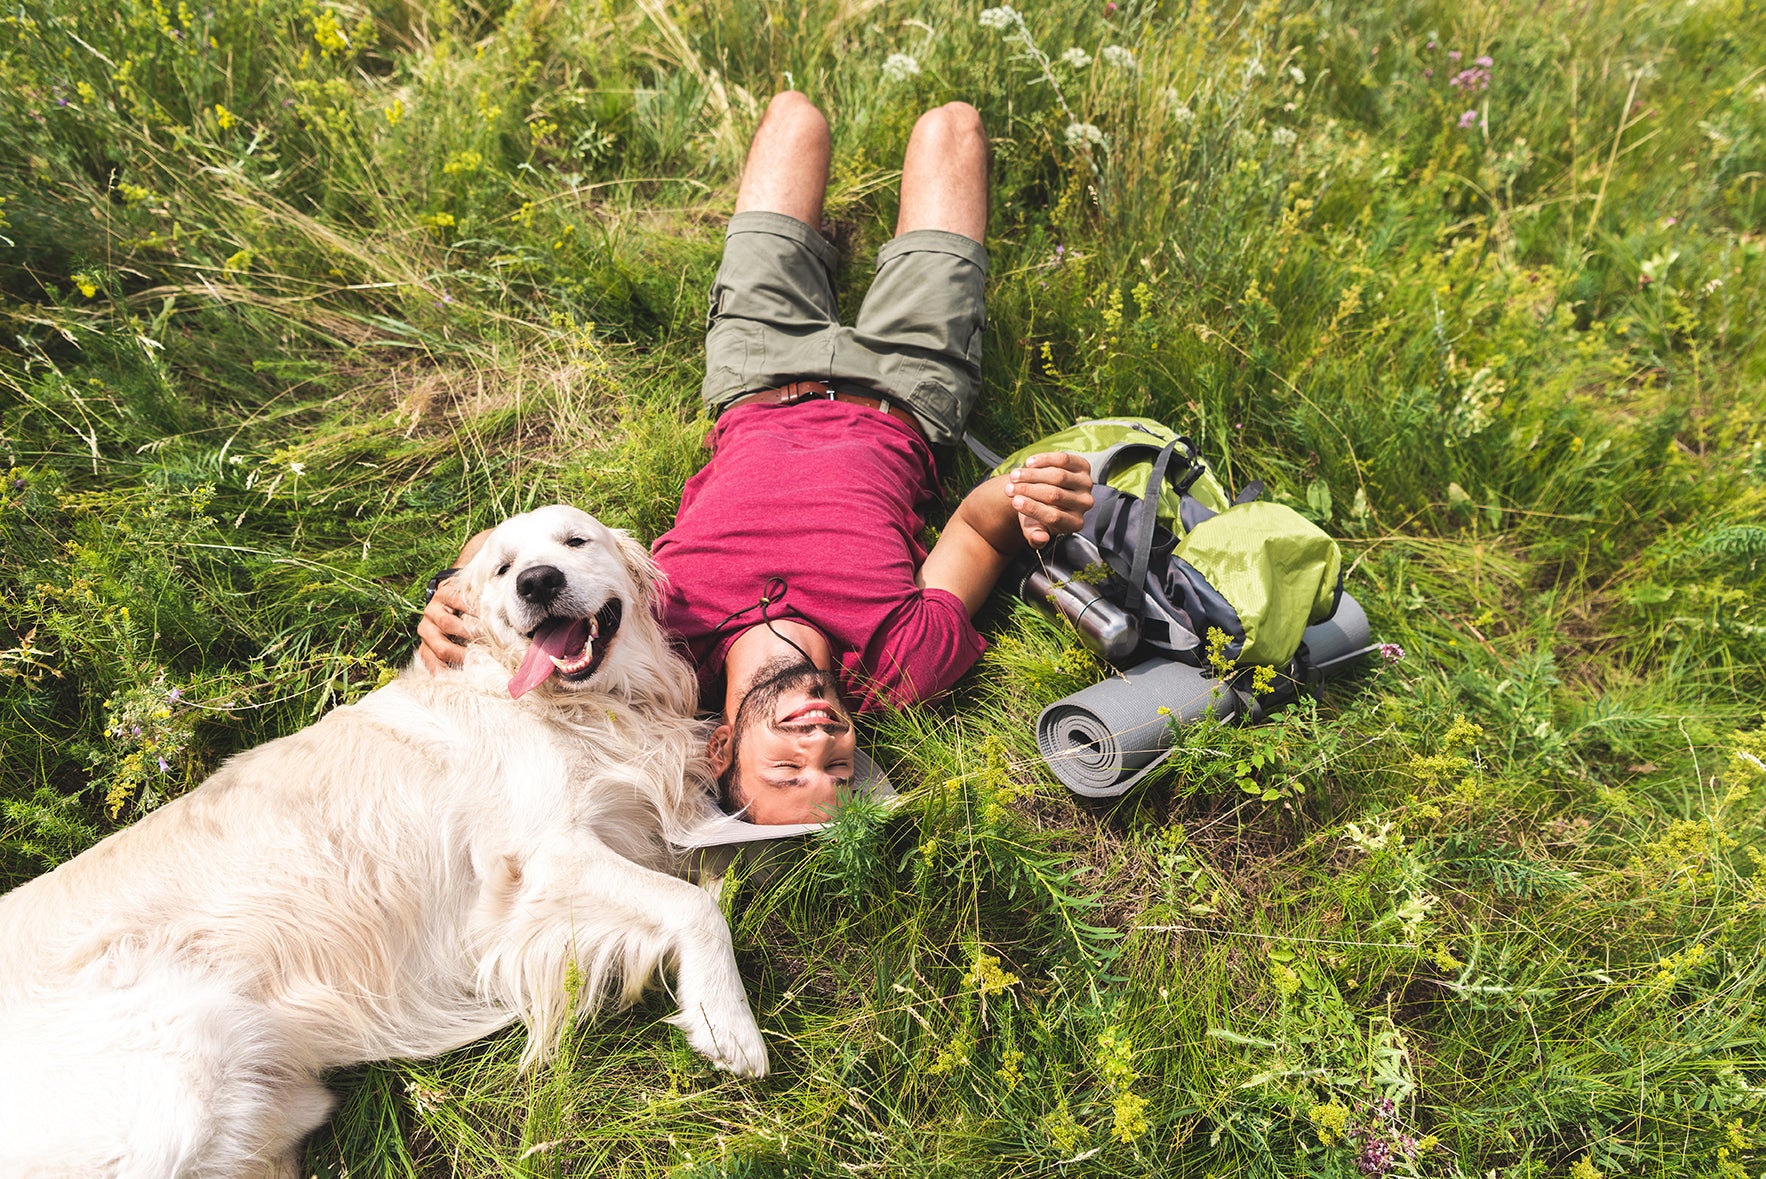 Dog and Pet Parent laying in grass after hike